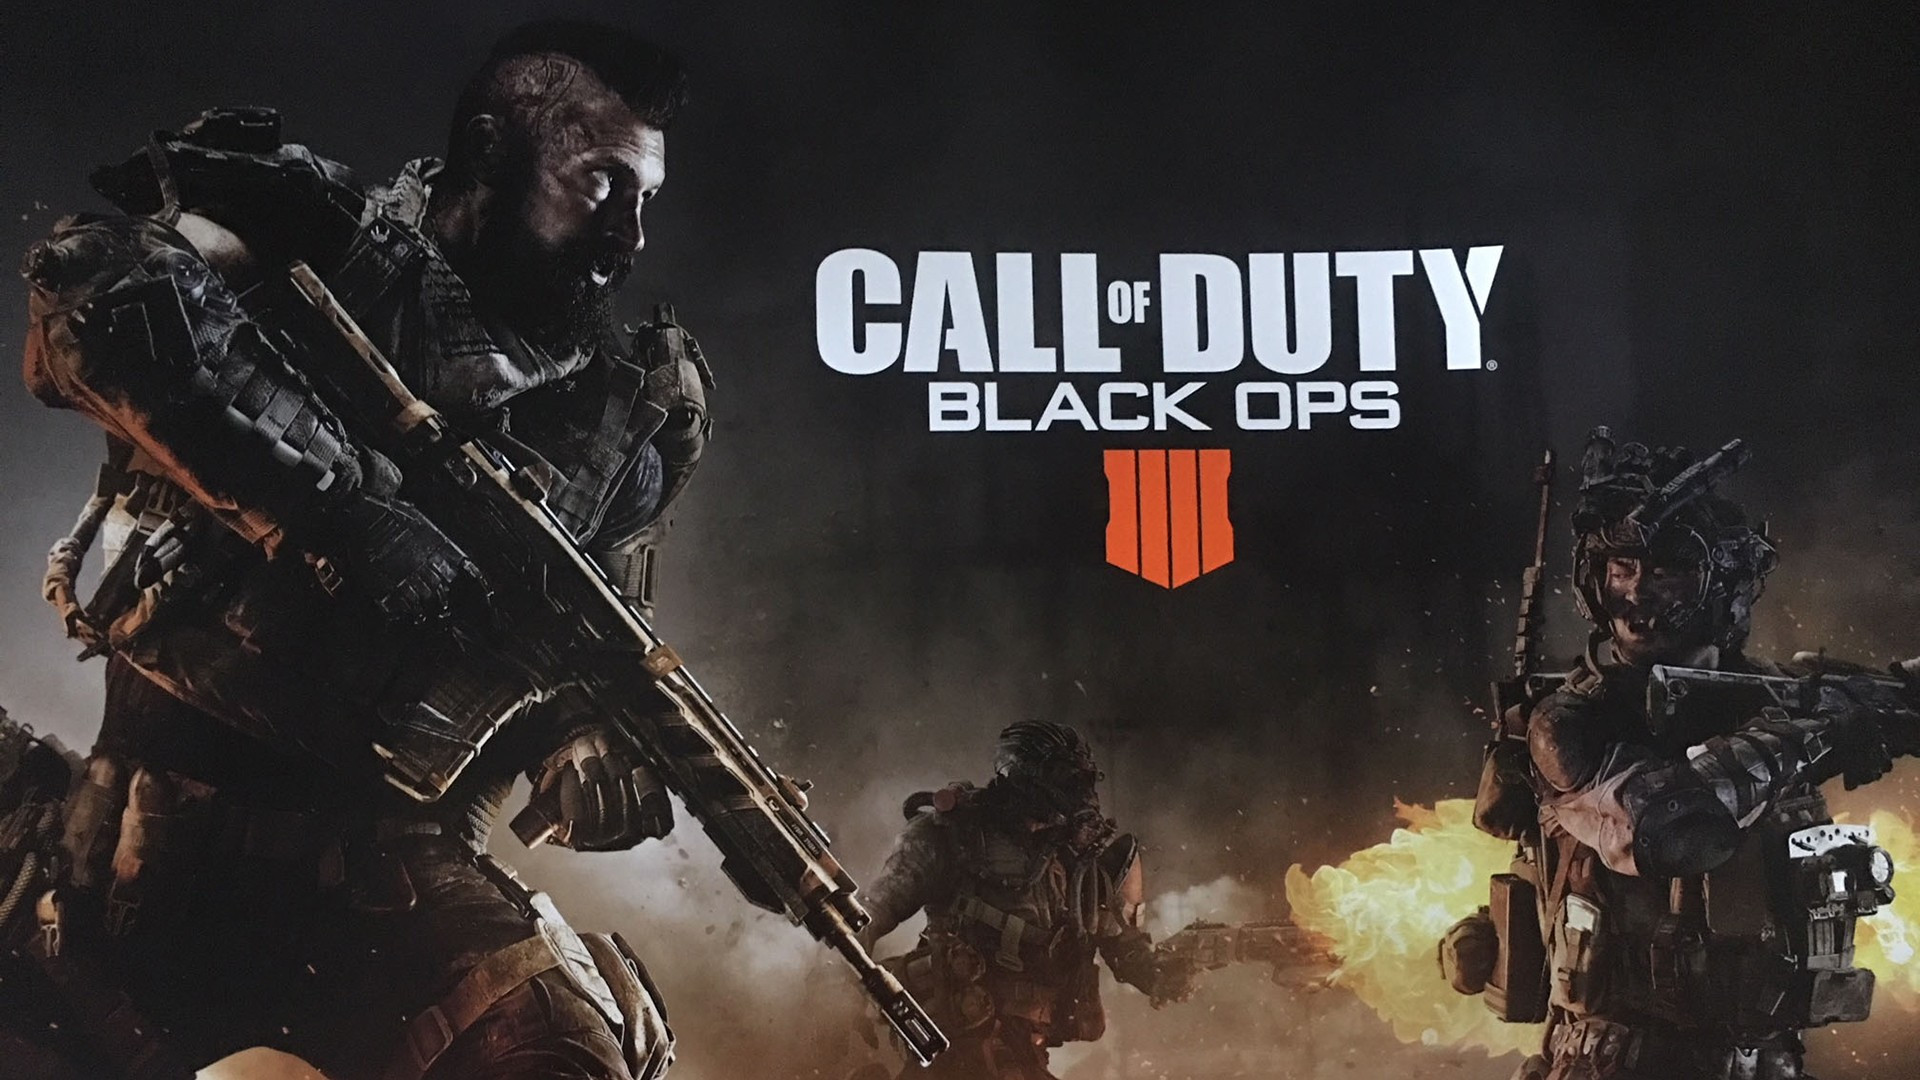 0p call of duty black ops 4 wallpapers